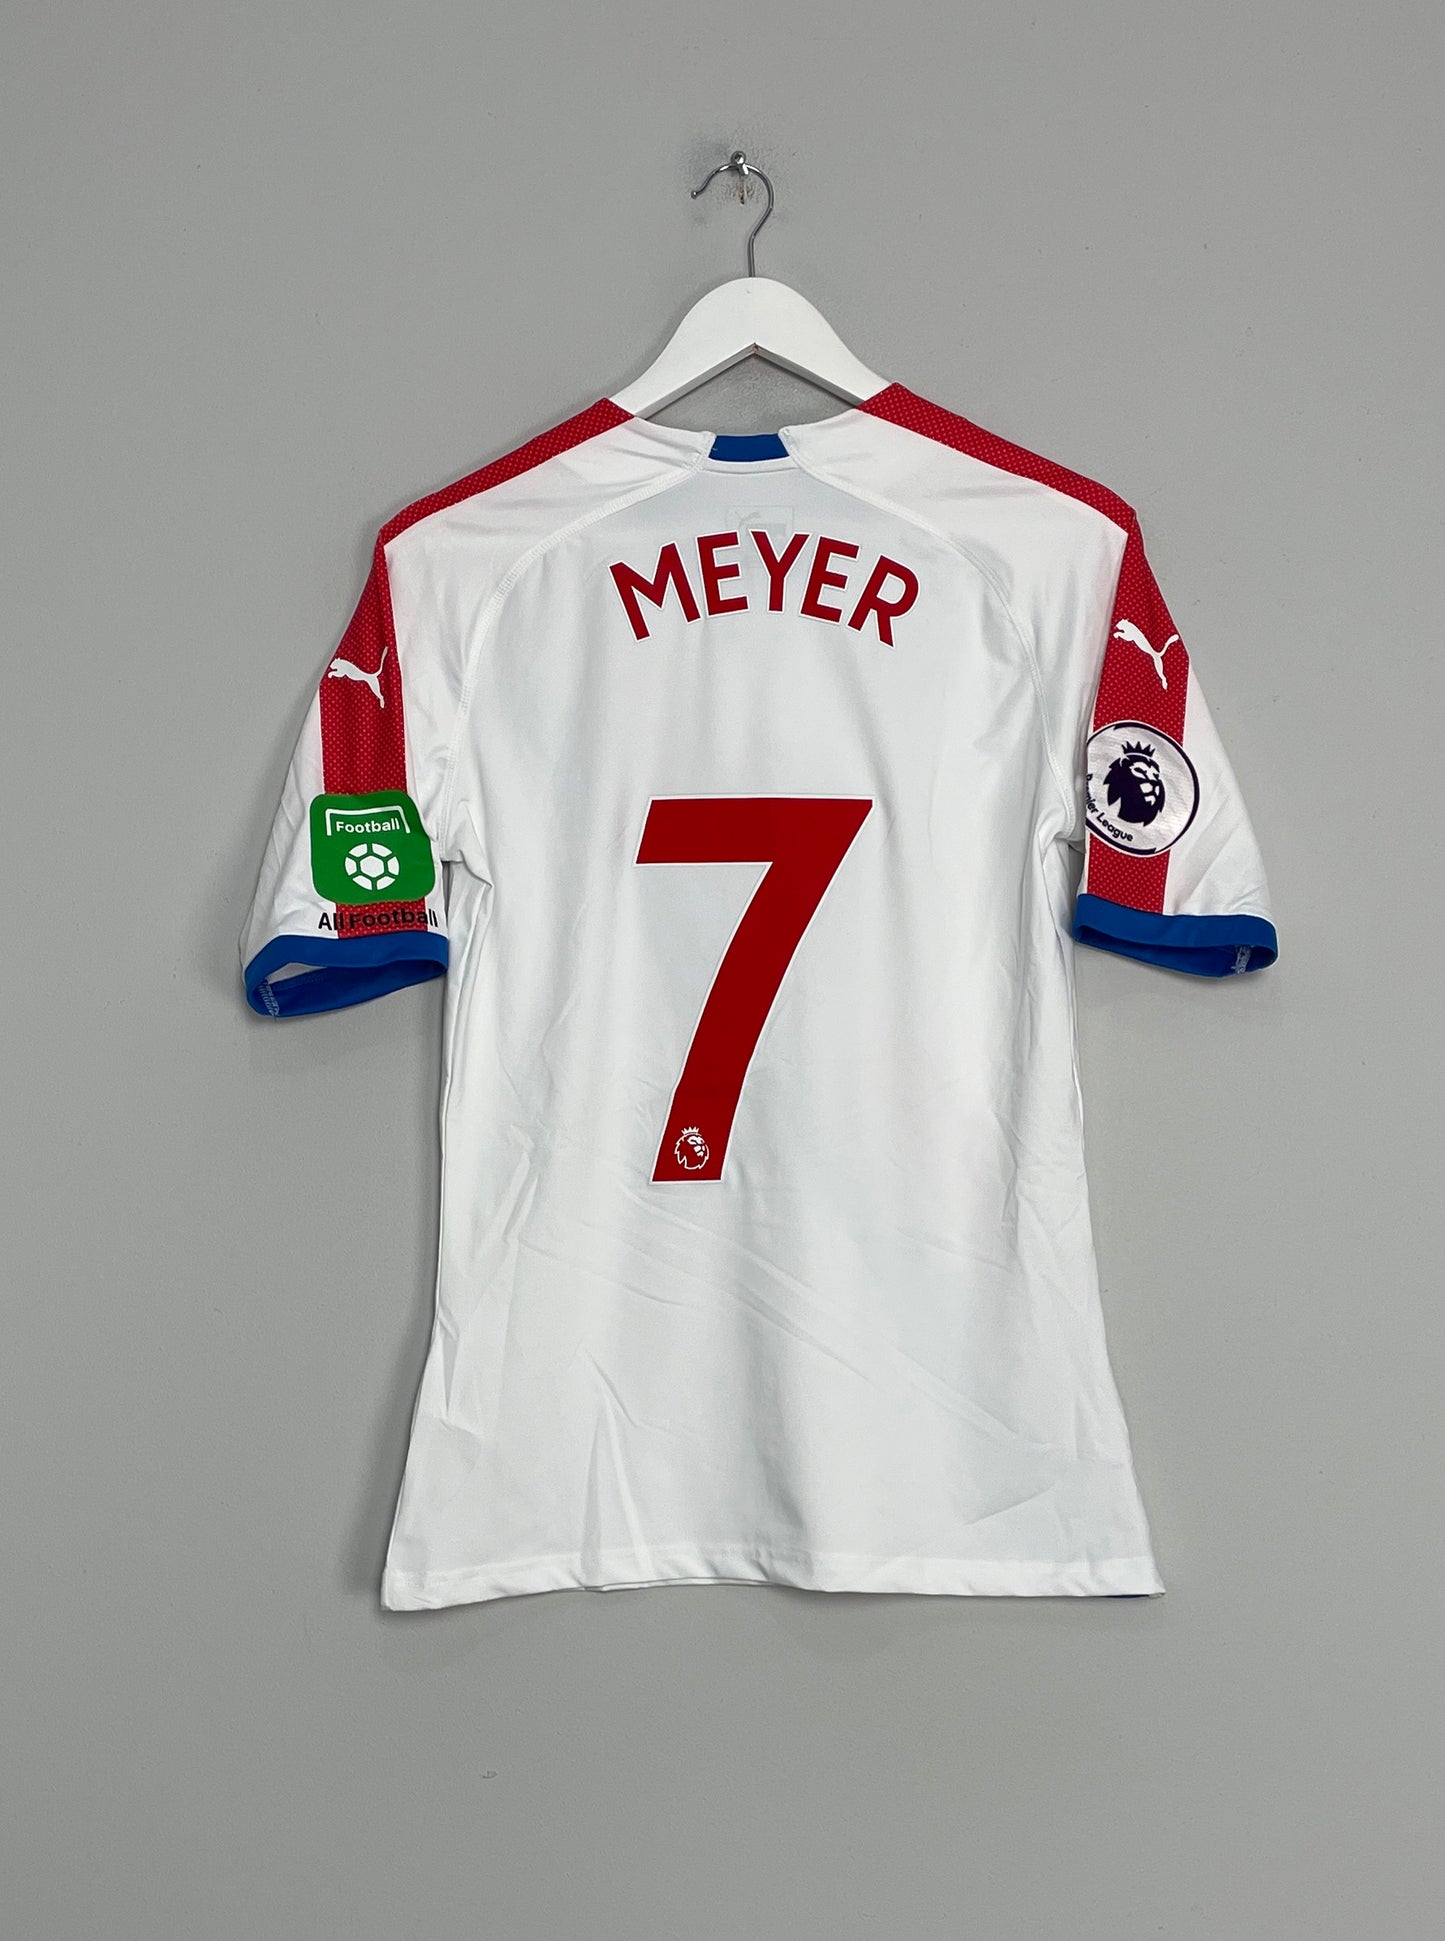 Image of the Cystal Palace Meyer shirt from the 2018/19 season